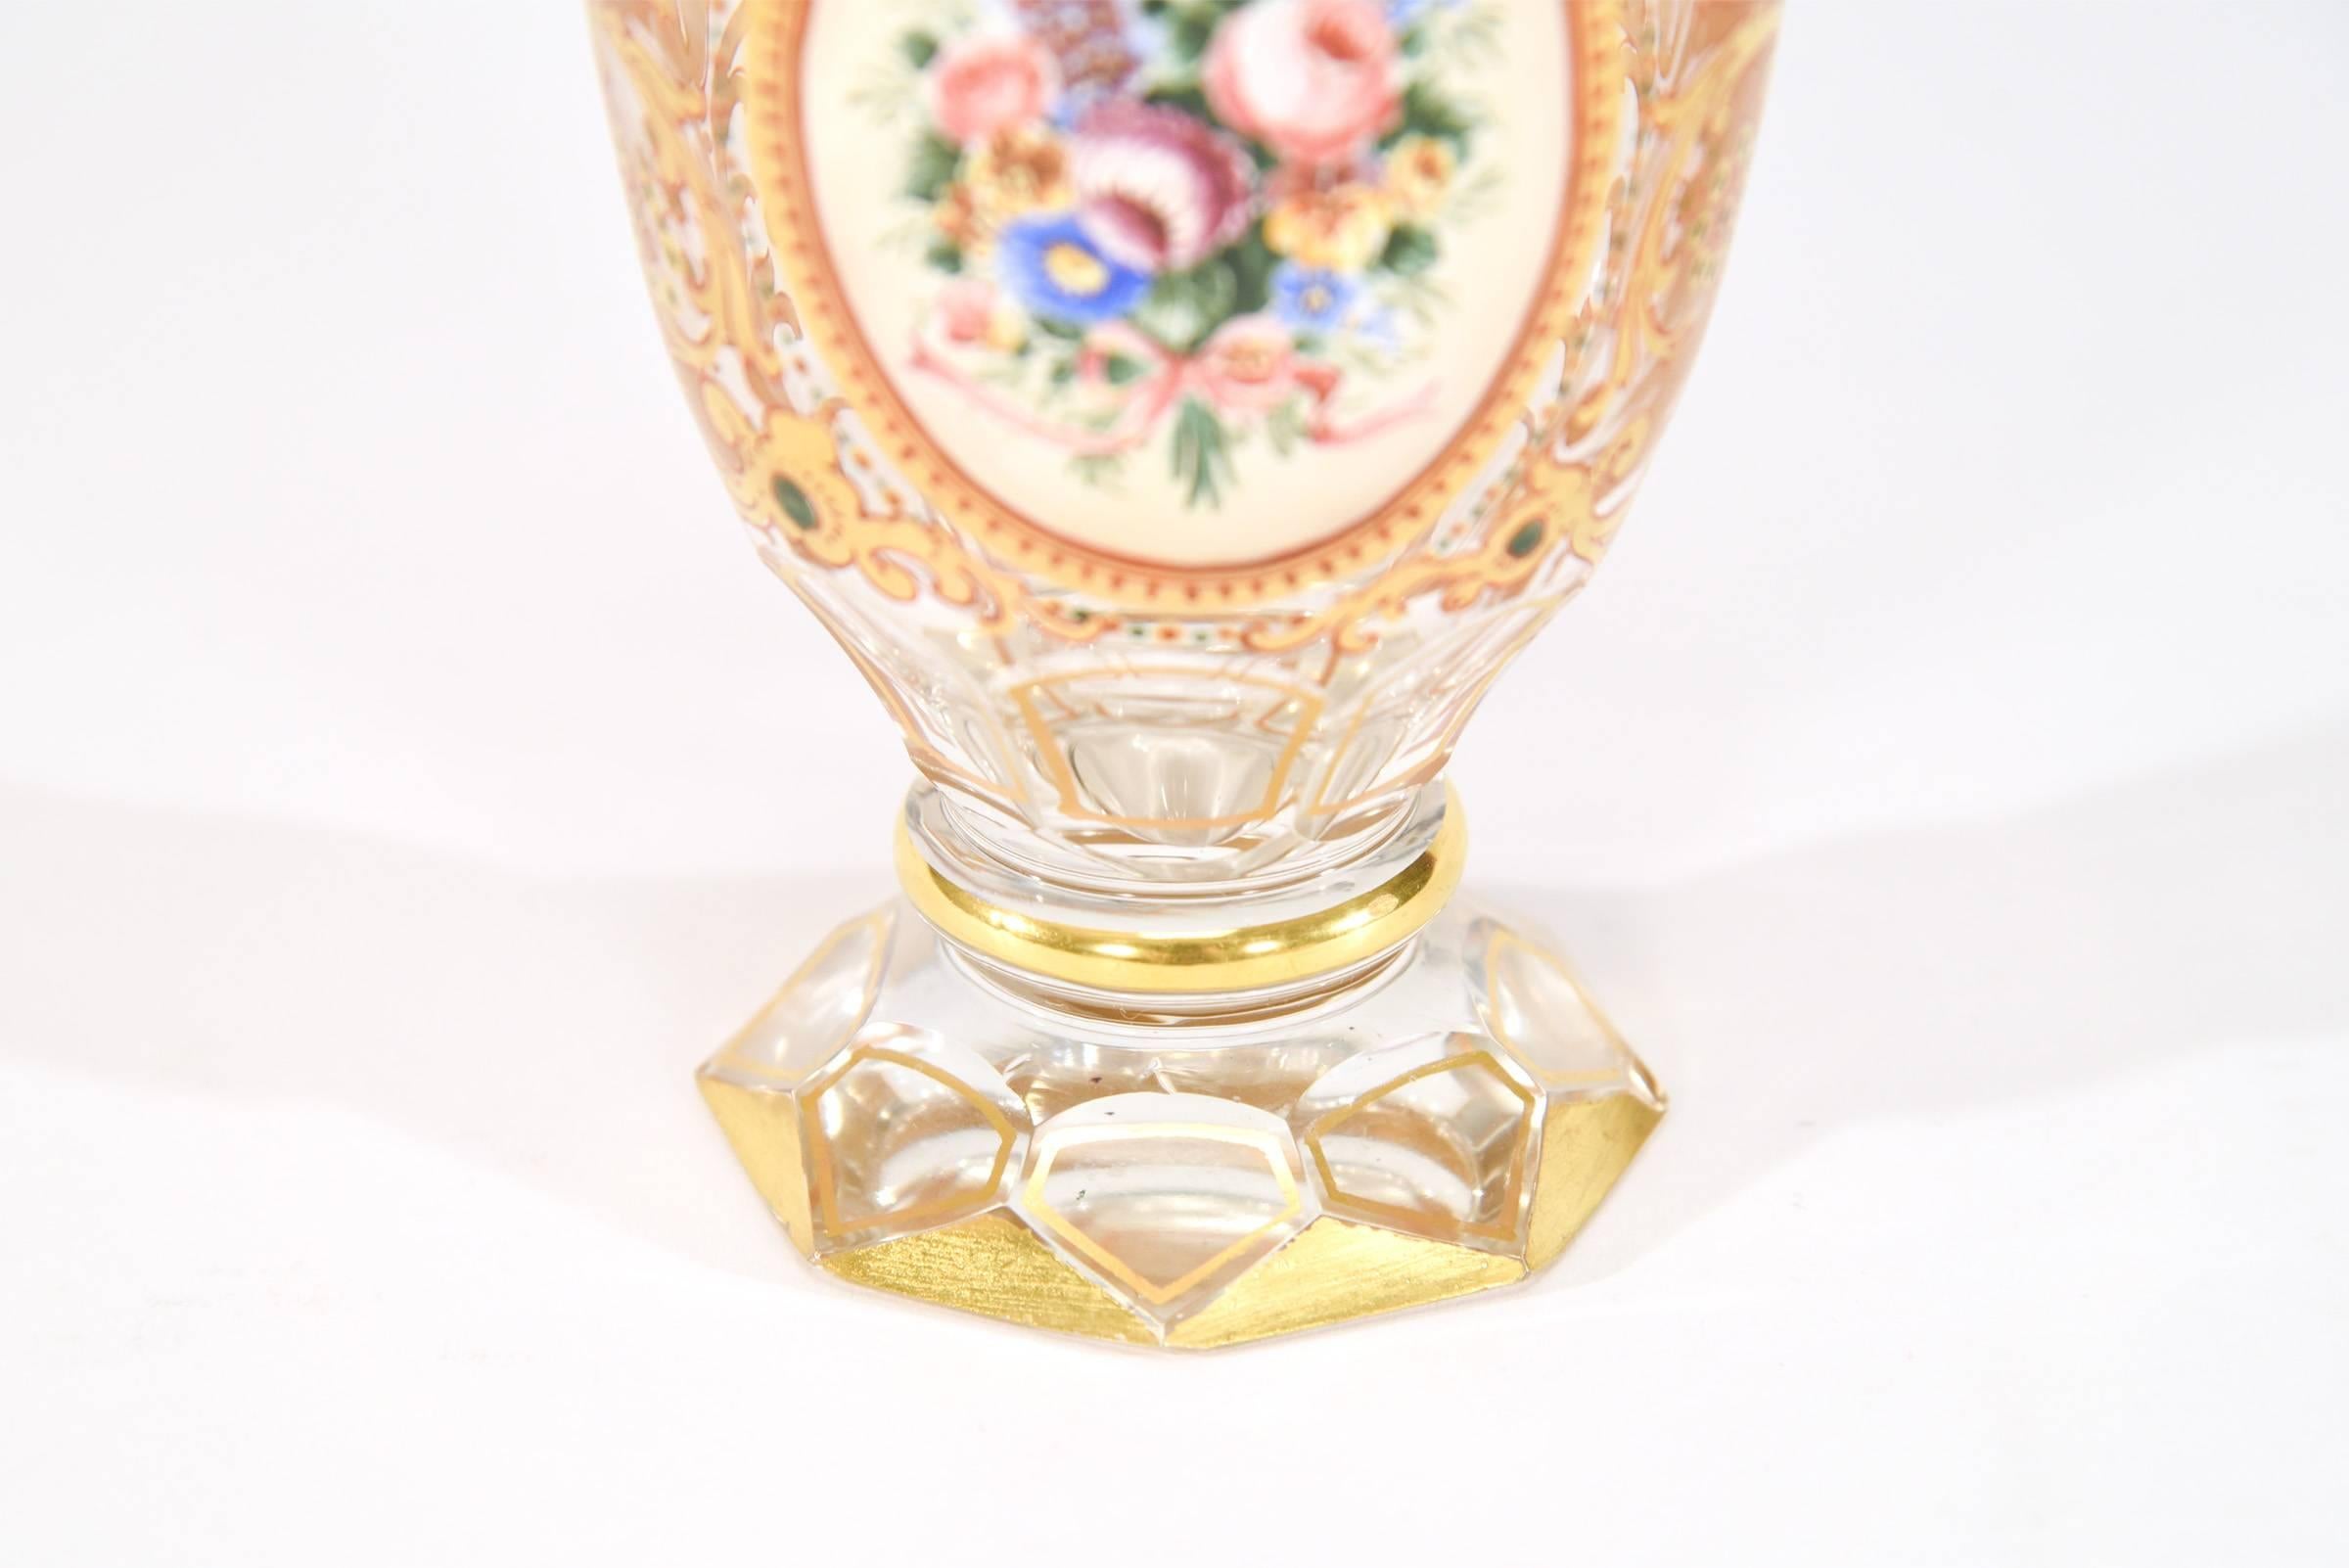 12 19th Century Crystal Tumblers with Polychrome Enamel Reserves Gold In Good Condition For Sale In Great Barrington, MA